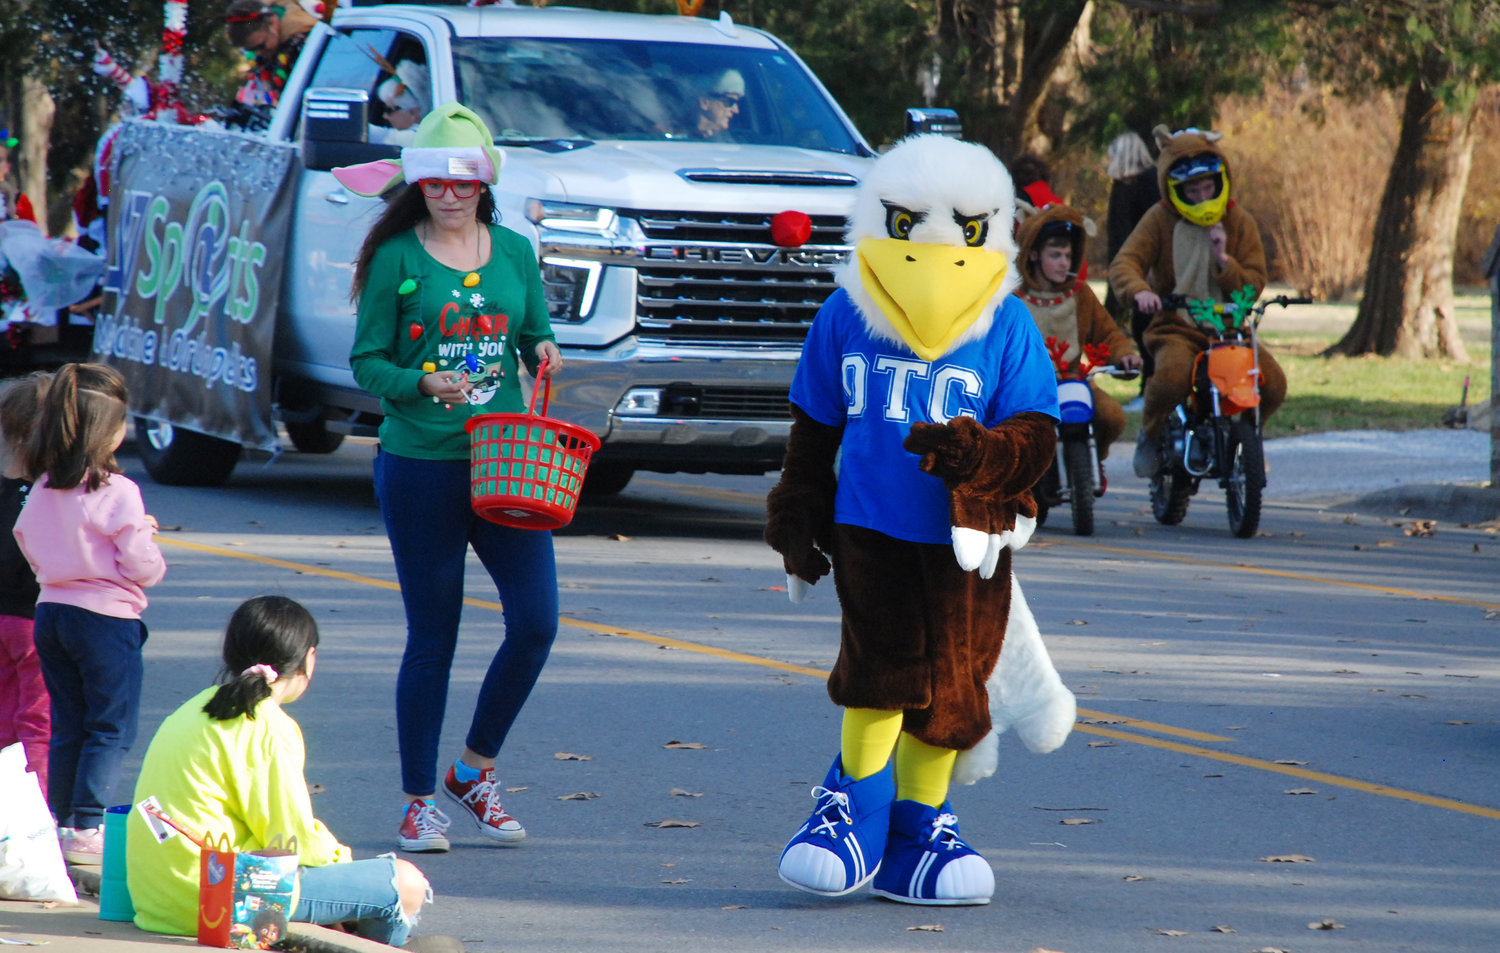 OZZY THE EAGLE, the mascot of Ozarks Technical Community College, represented Christian County’s Richwood Valley campus at the Nixa Christmas Parade.